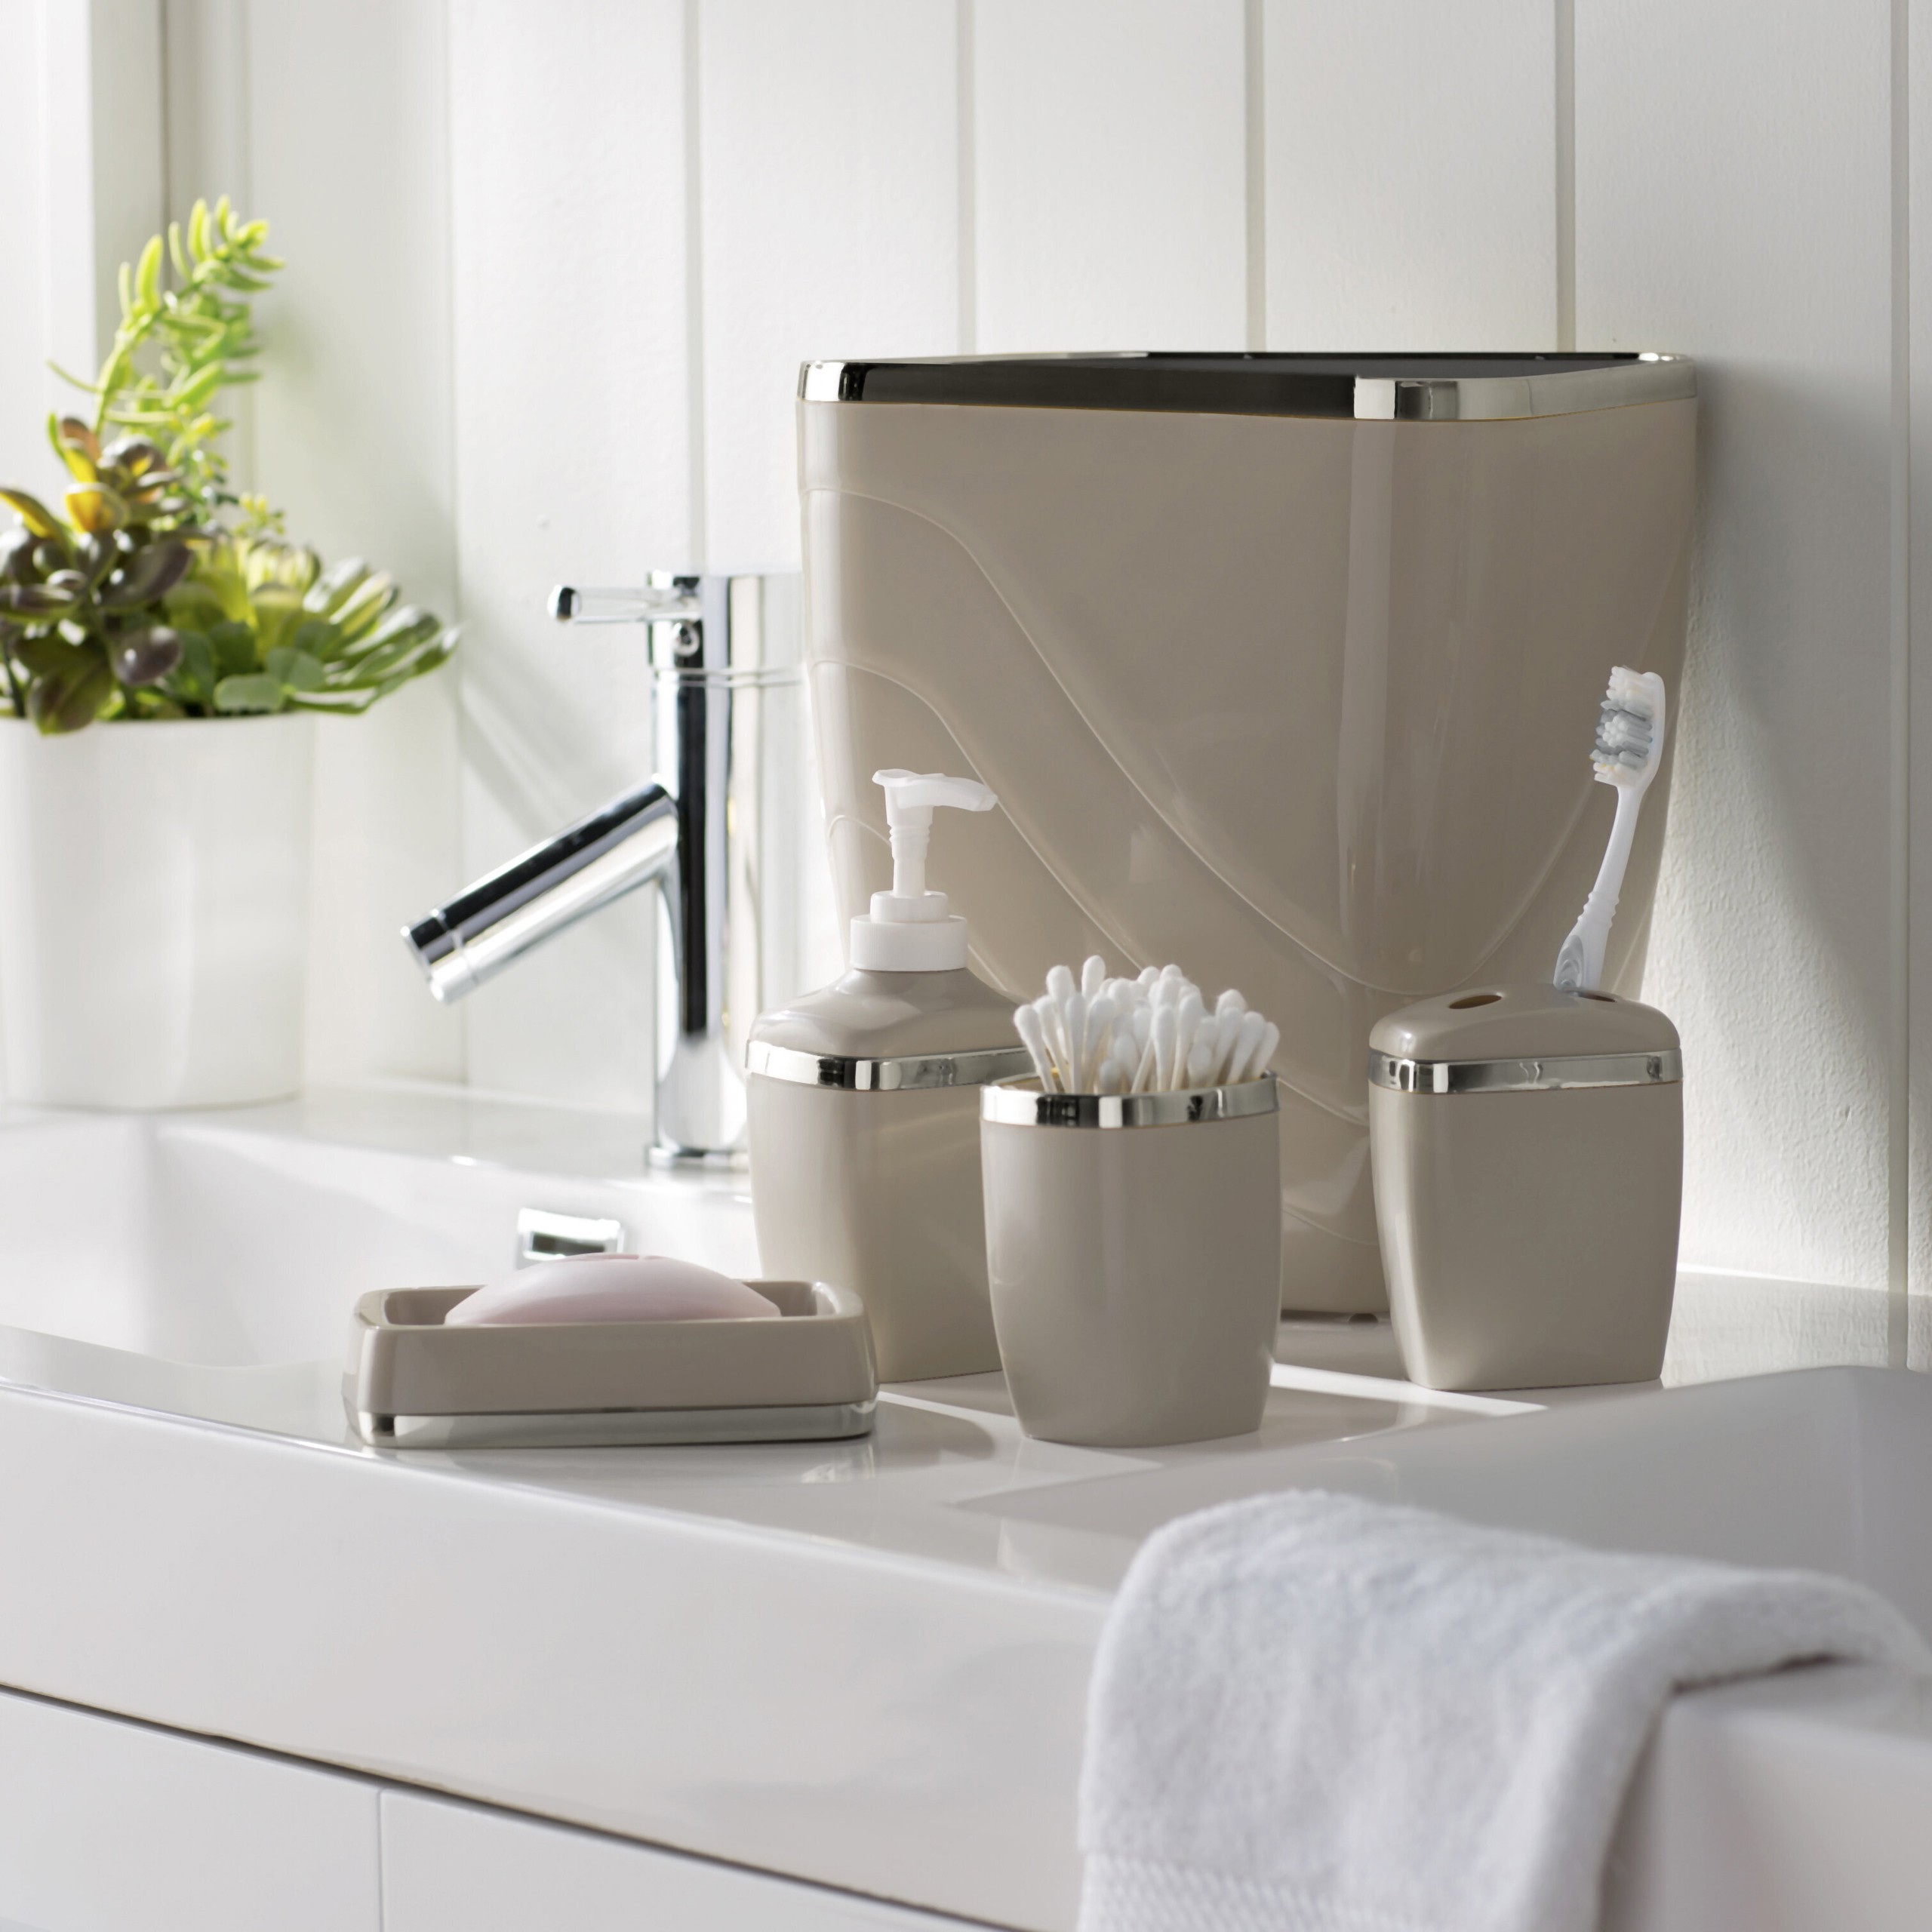 How to Decide on the Best Placement for Your Client's Bathroom Accessory  Set